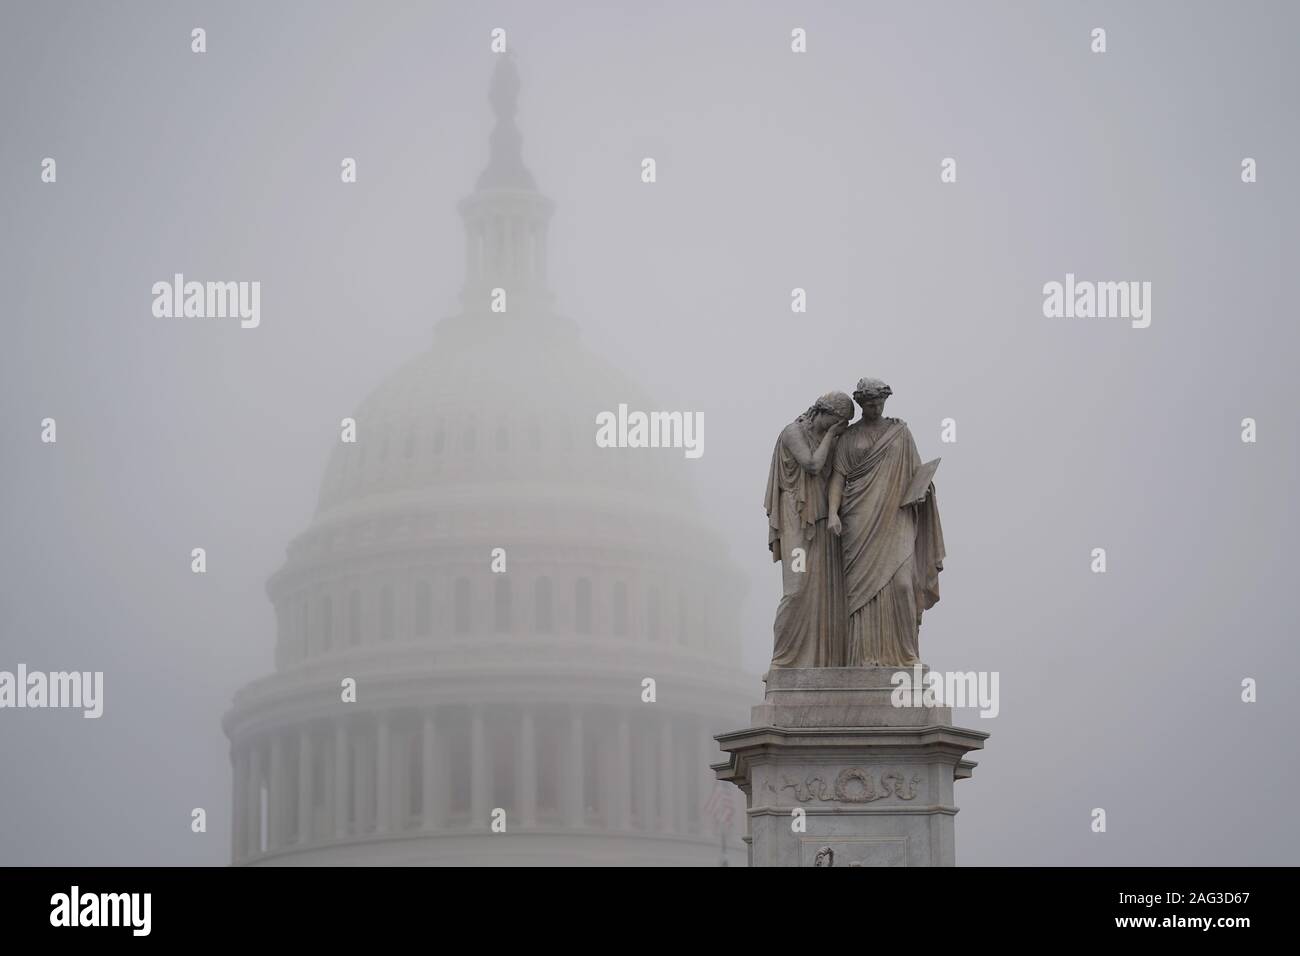 Washington, USA. 17th Dec, 2019. The Capitol Hill is shrouded in fog in Washington, DC, the United States, on Dec. 17, 2019. U.S. President Donald Trump on Tuesday sent a six-page letter to House Speaker Nancy Pelosi, slamming the House Democrats impeachment effort as an 'illegal, partisan attempted coup' and an 'unprecedented and unconstitutional abuse of power.' Credit: Liu Jie/Xinhua/Alamy Live News Stock Photo